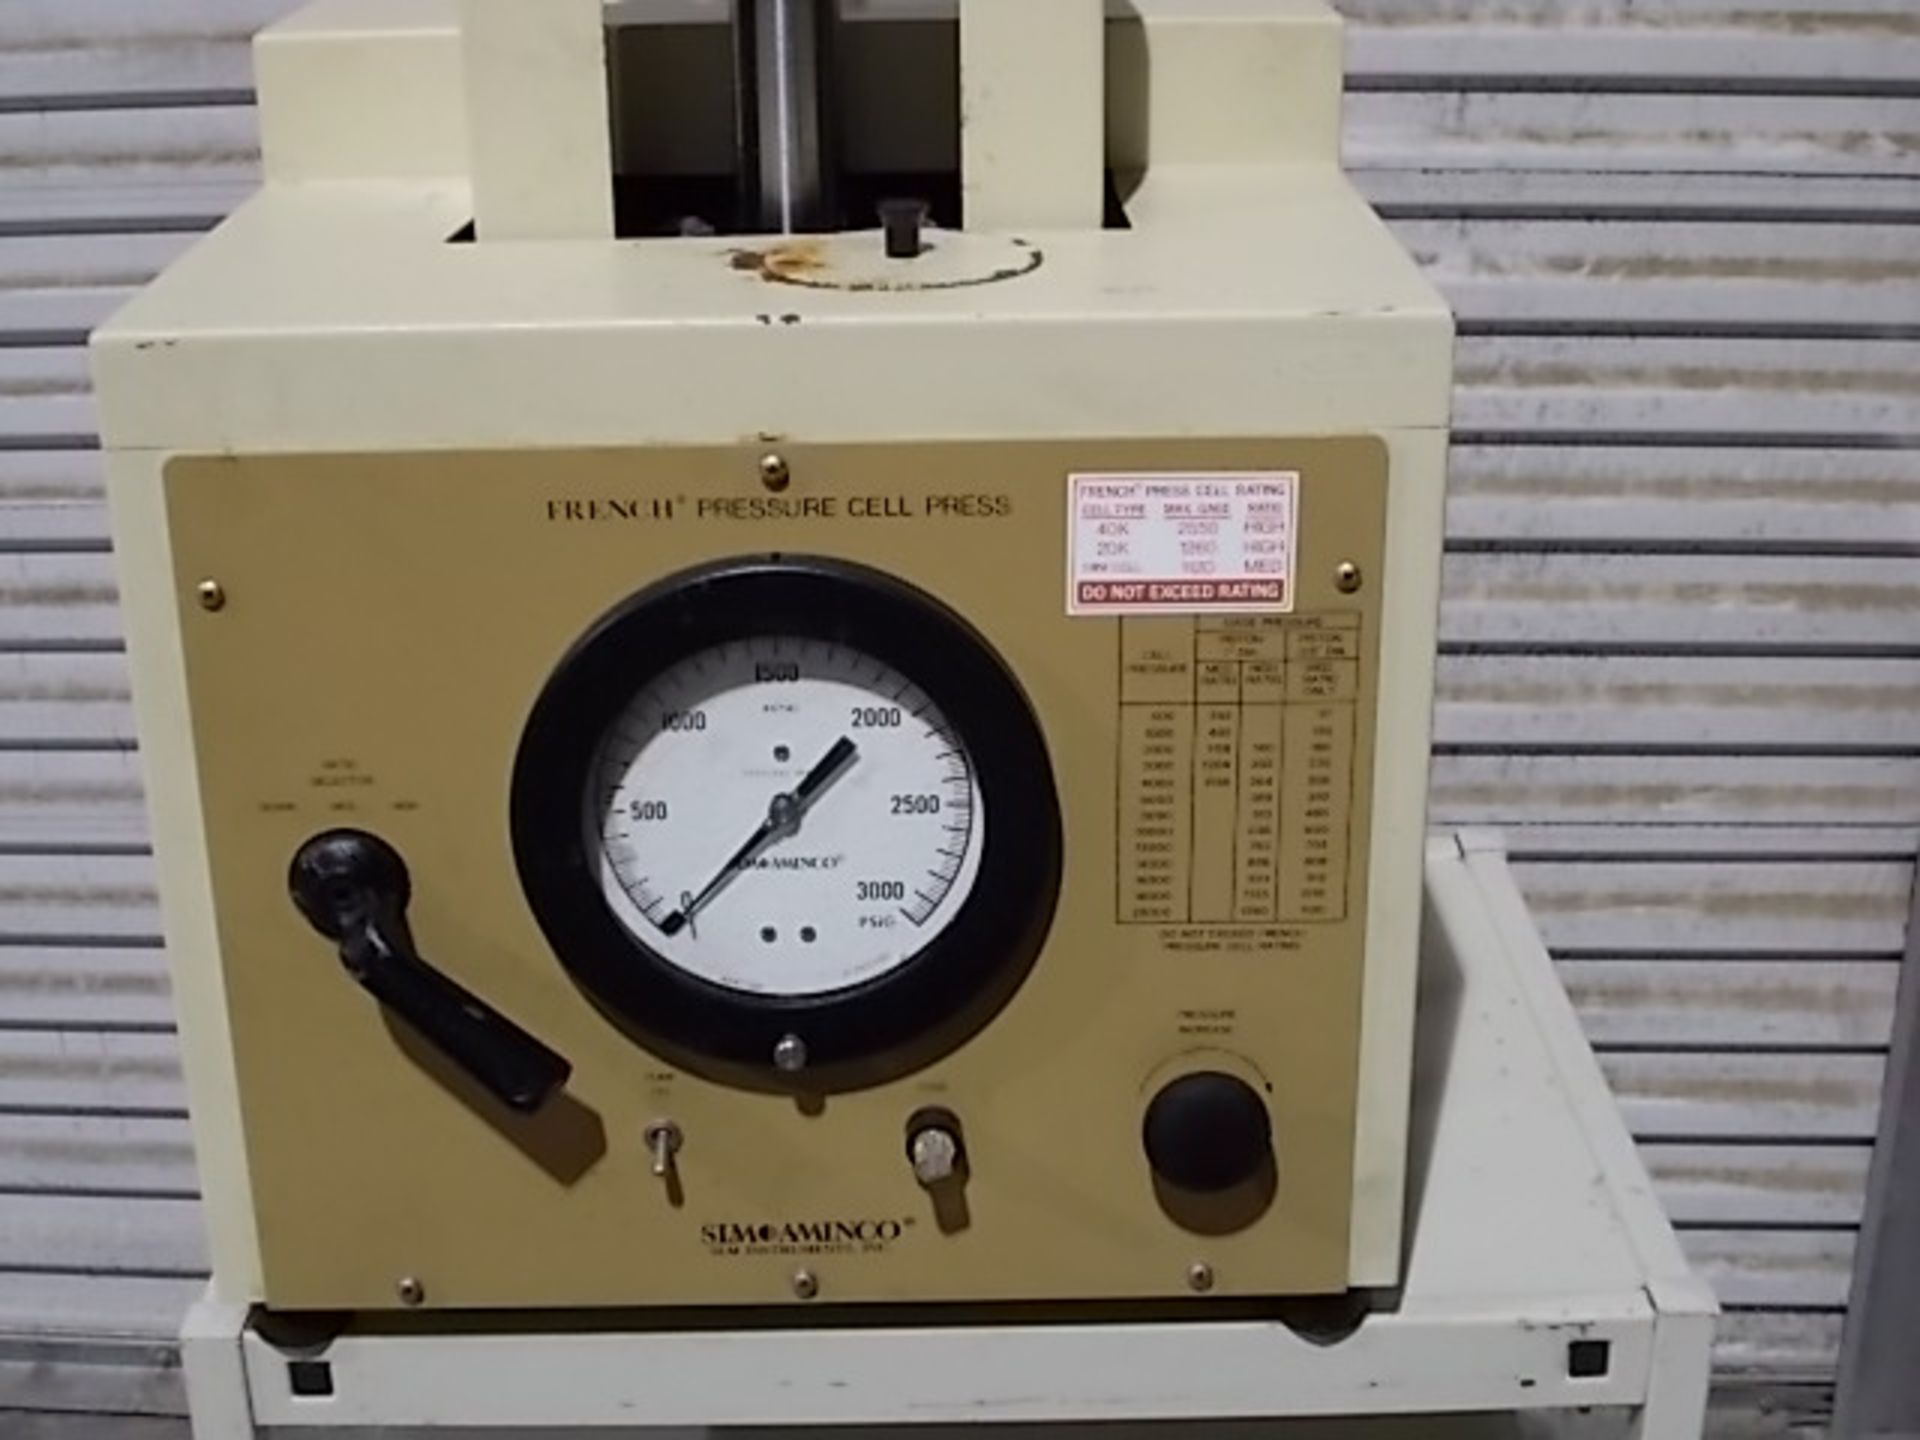 SLM Aminco French Pressure Cell Press Model FA-078, Qty 1, 321462158502 - Image 2 of 20